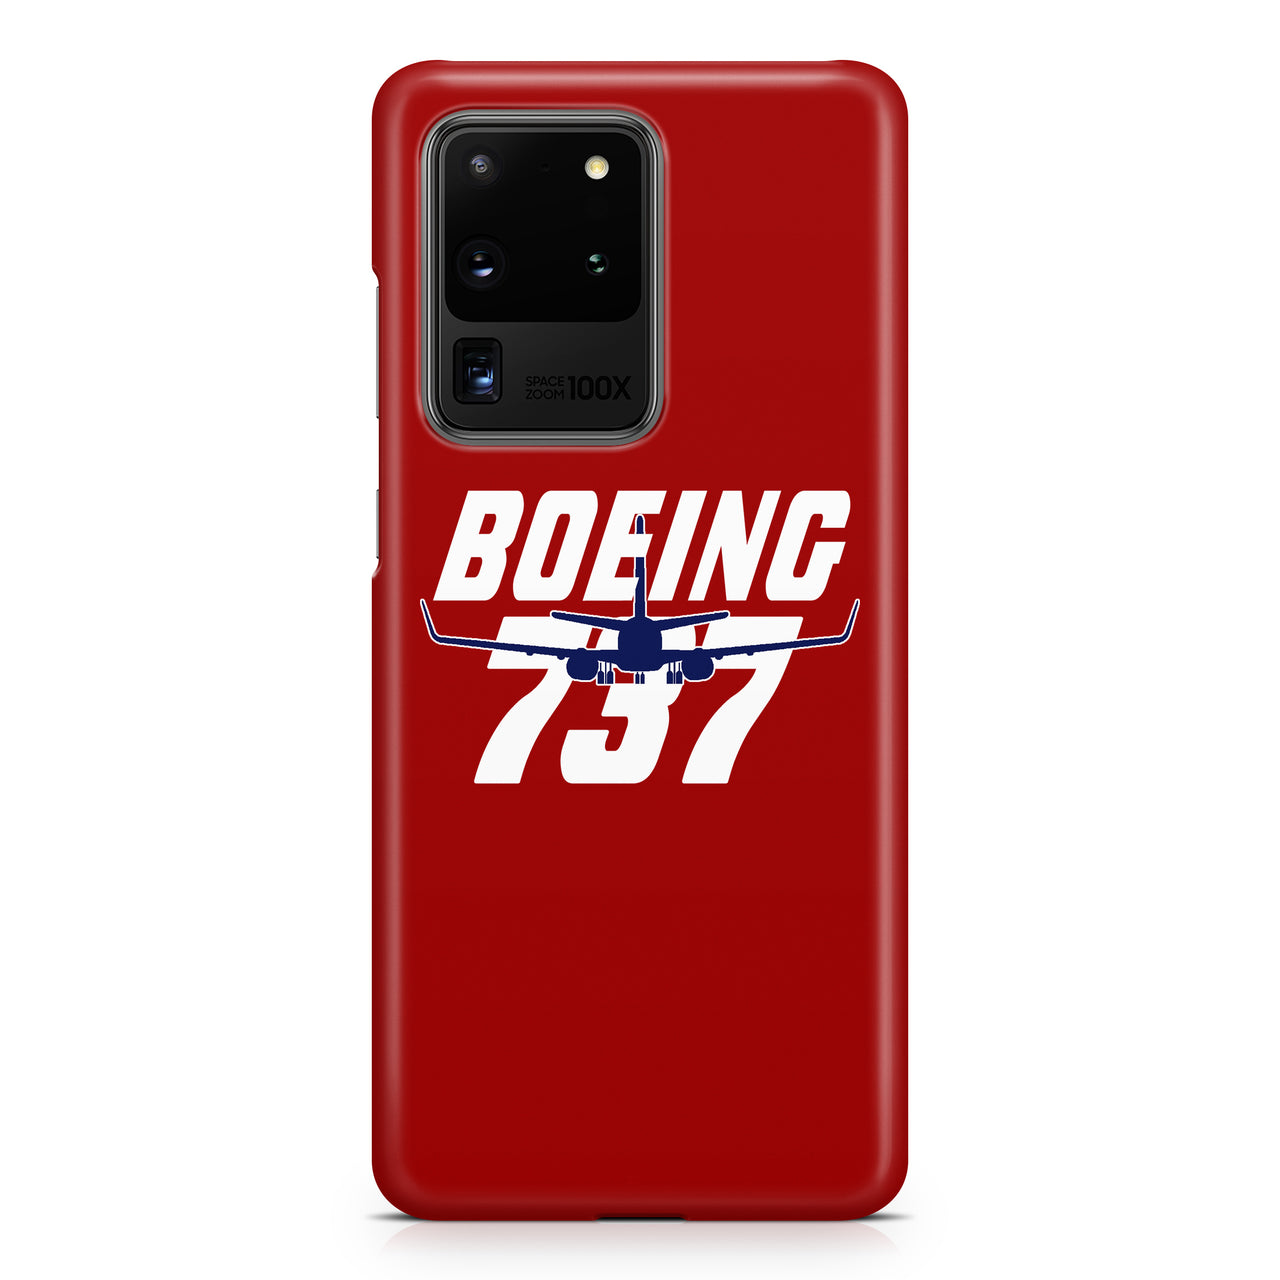 Amazing Boeing 737 Samsung A Cases